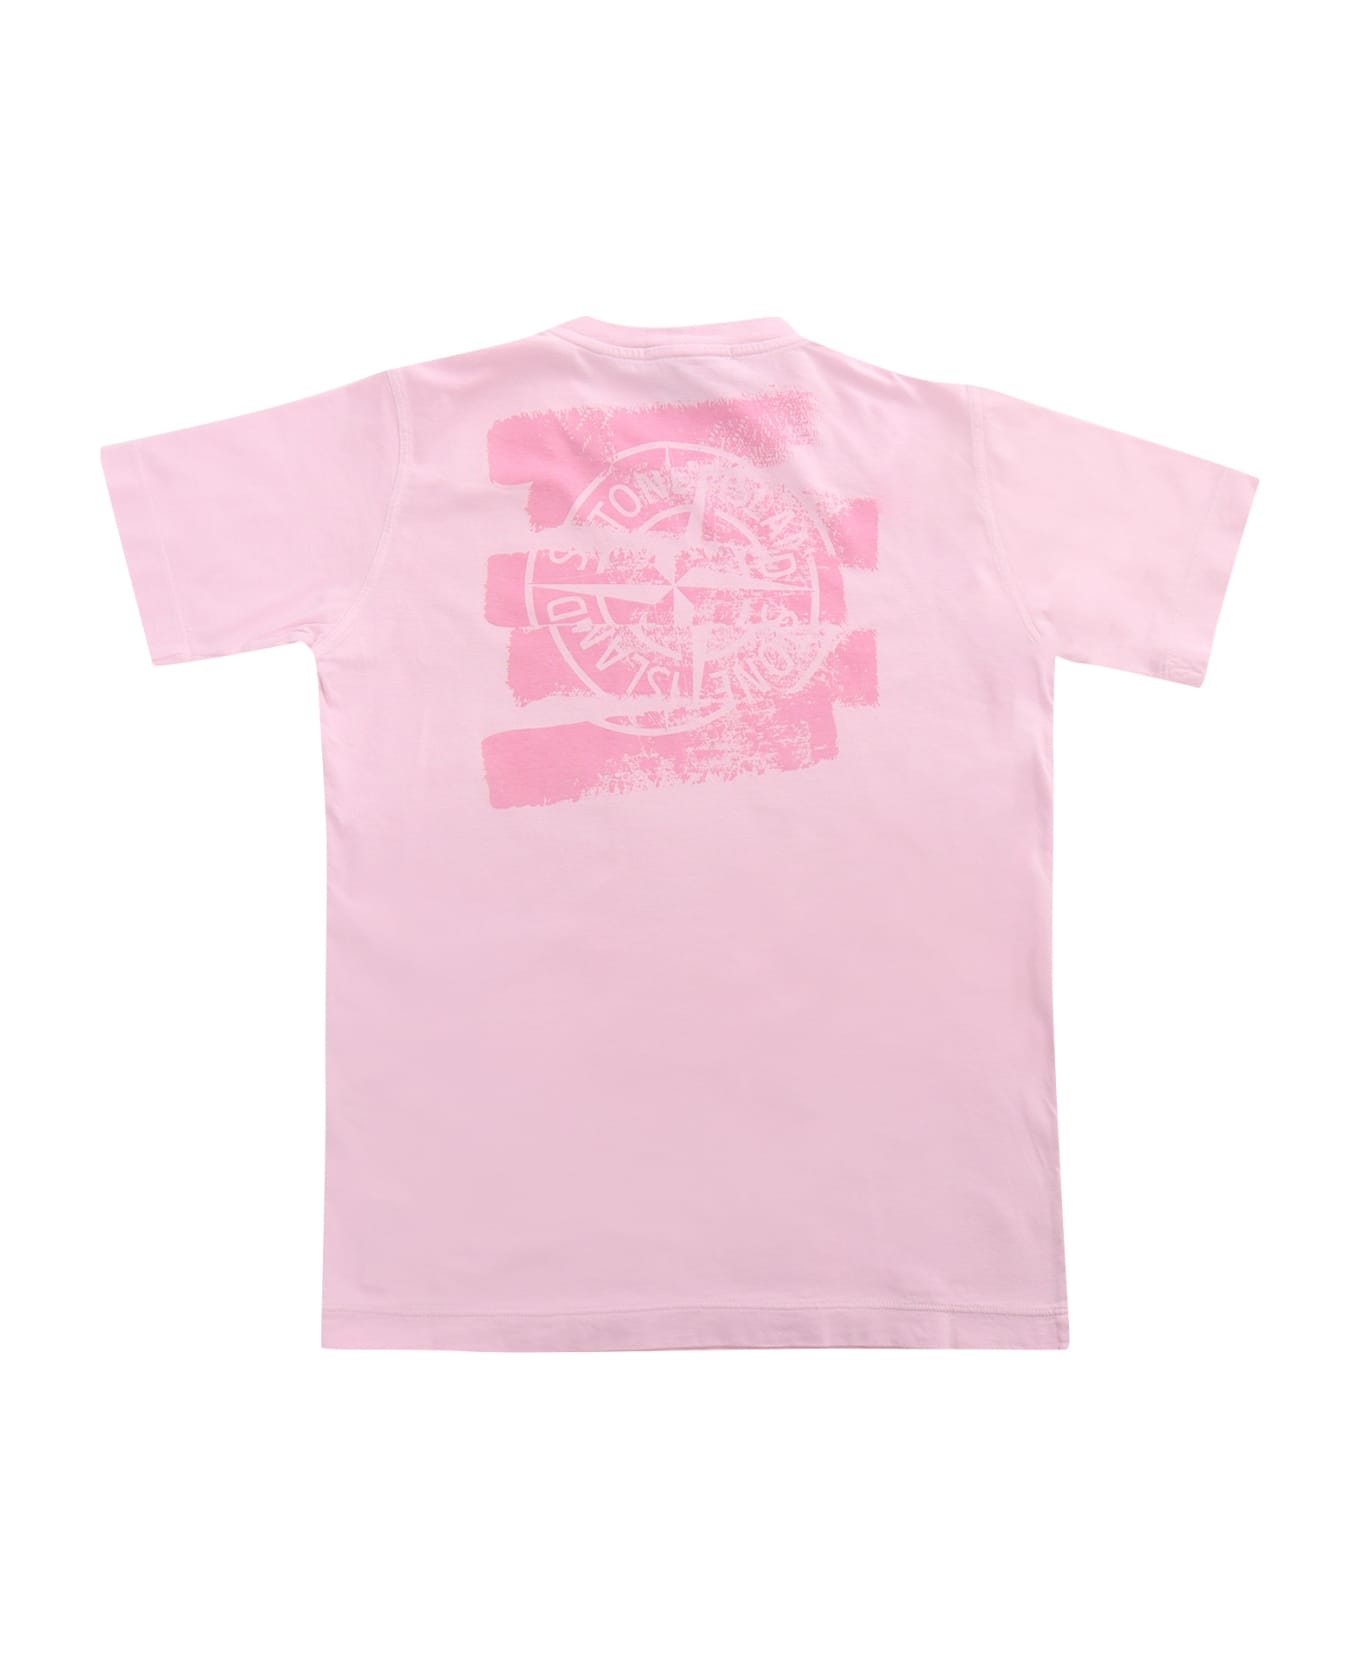 Stone Island Junior Pink T-shirt With Prints - PINK Tシャツ＆ポロシャツ